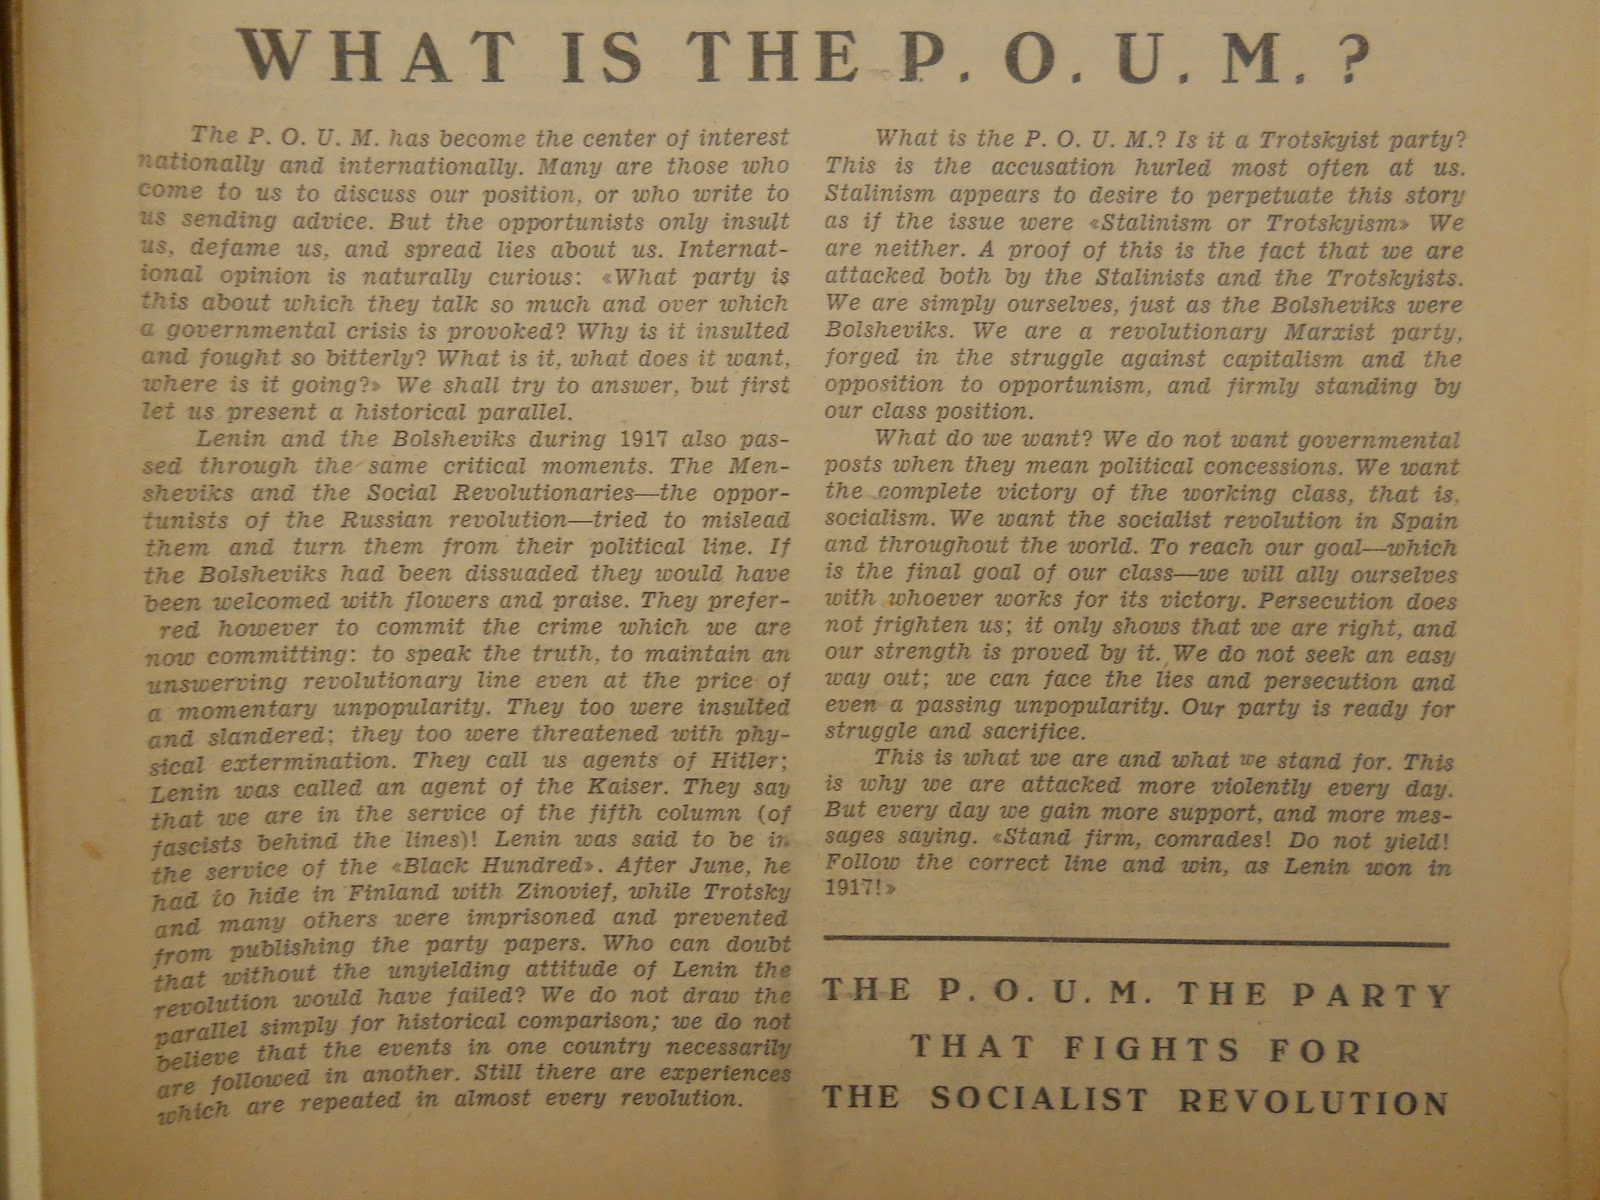 "What is the POUM?" publication explaining the P.O.U.M. The party that fights for the Socialist Revolution